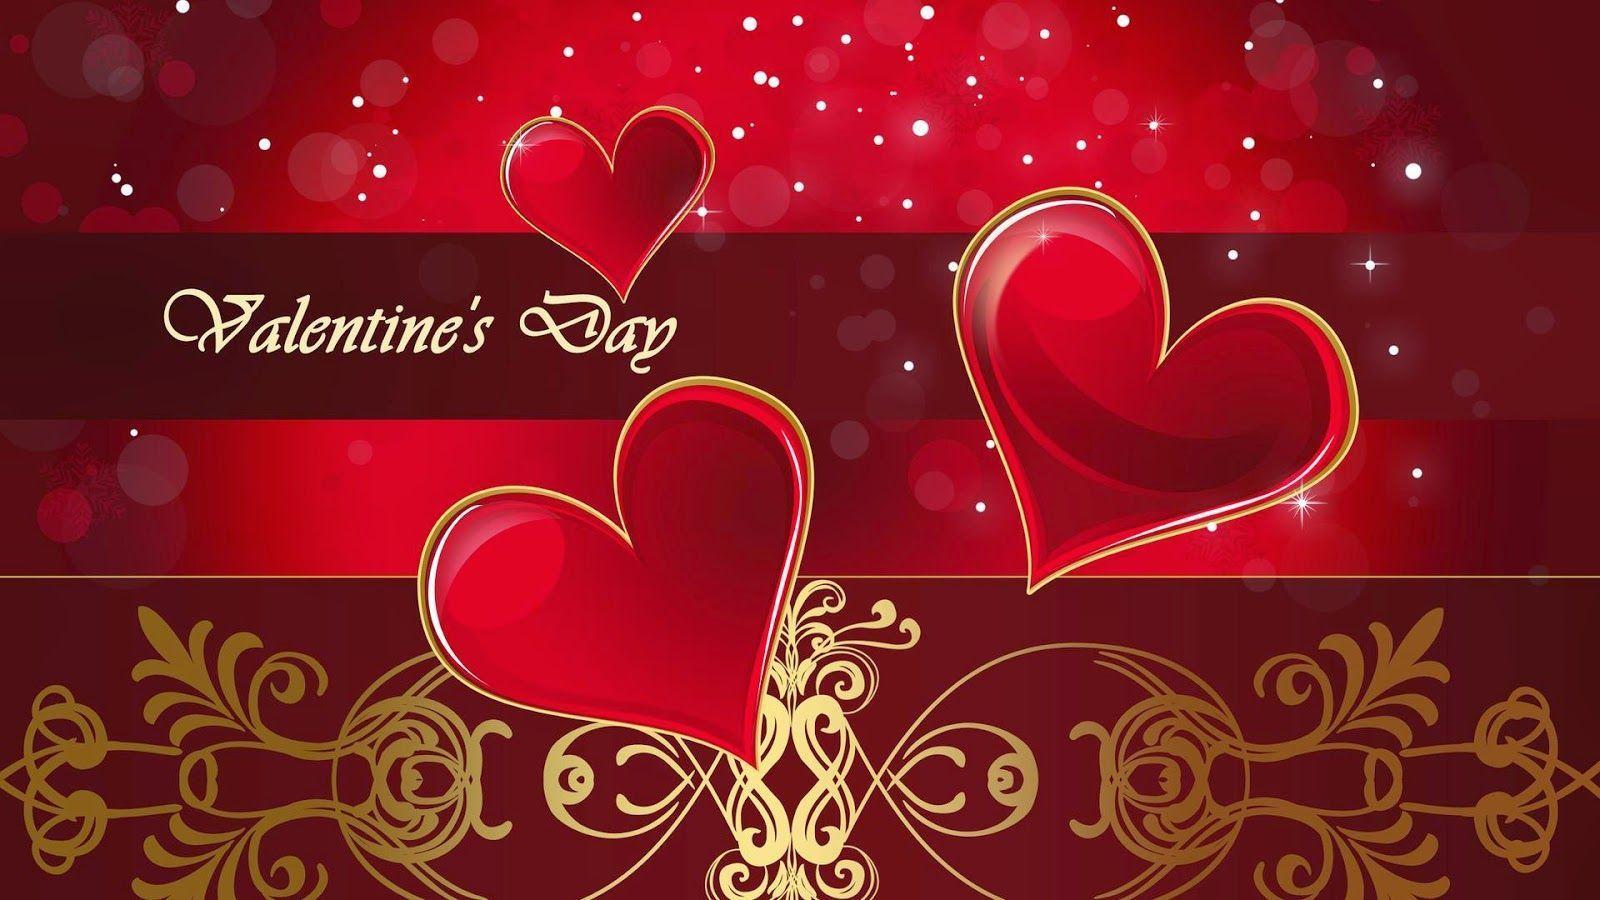 Happy Valentines Day 2016 Image, SMS, Wishes, Quotes, Shayari